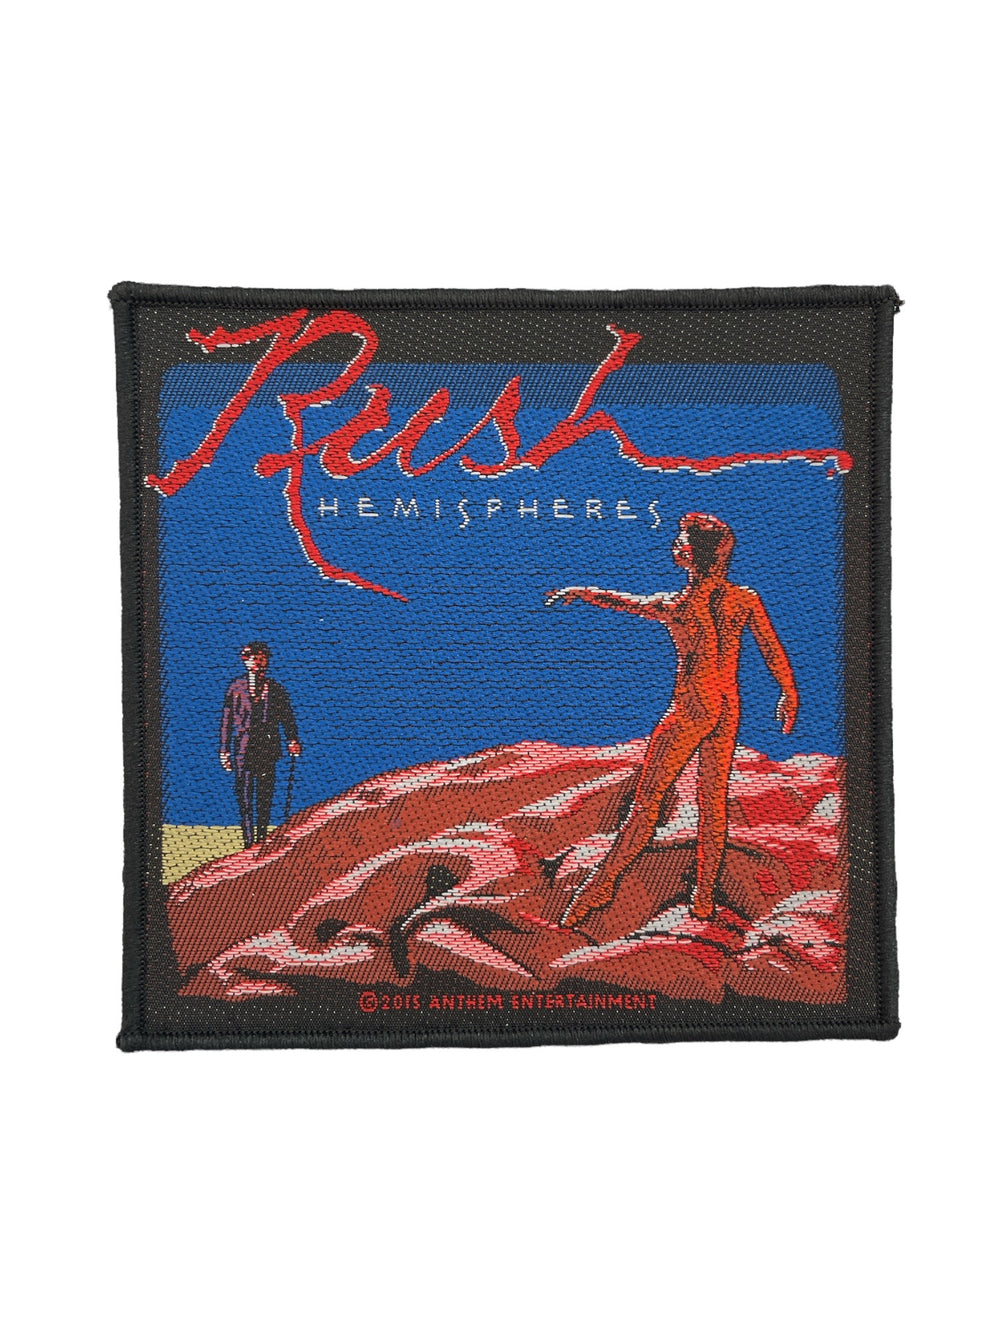 Rush Hemispheres Official Woven Patch Brand New